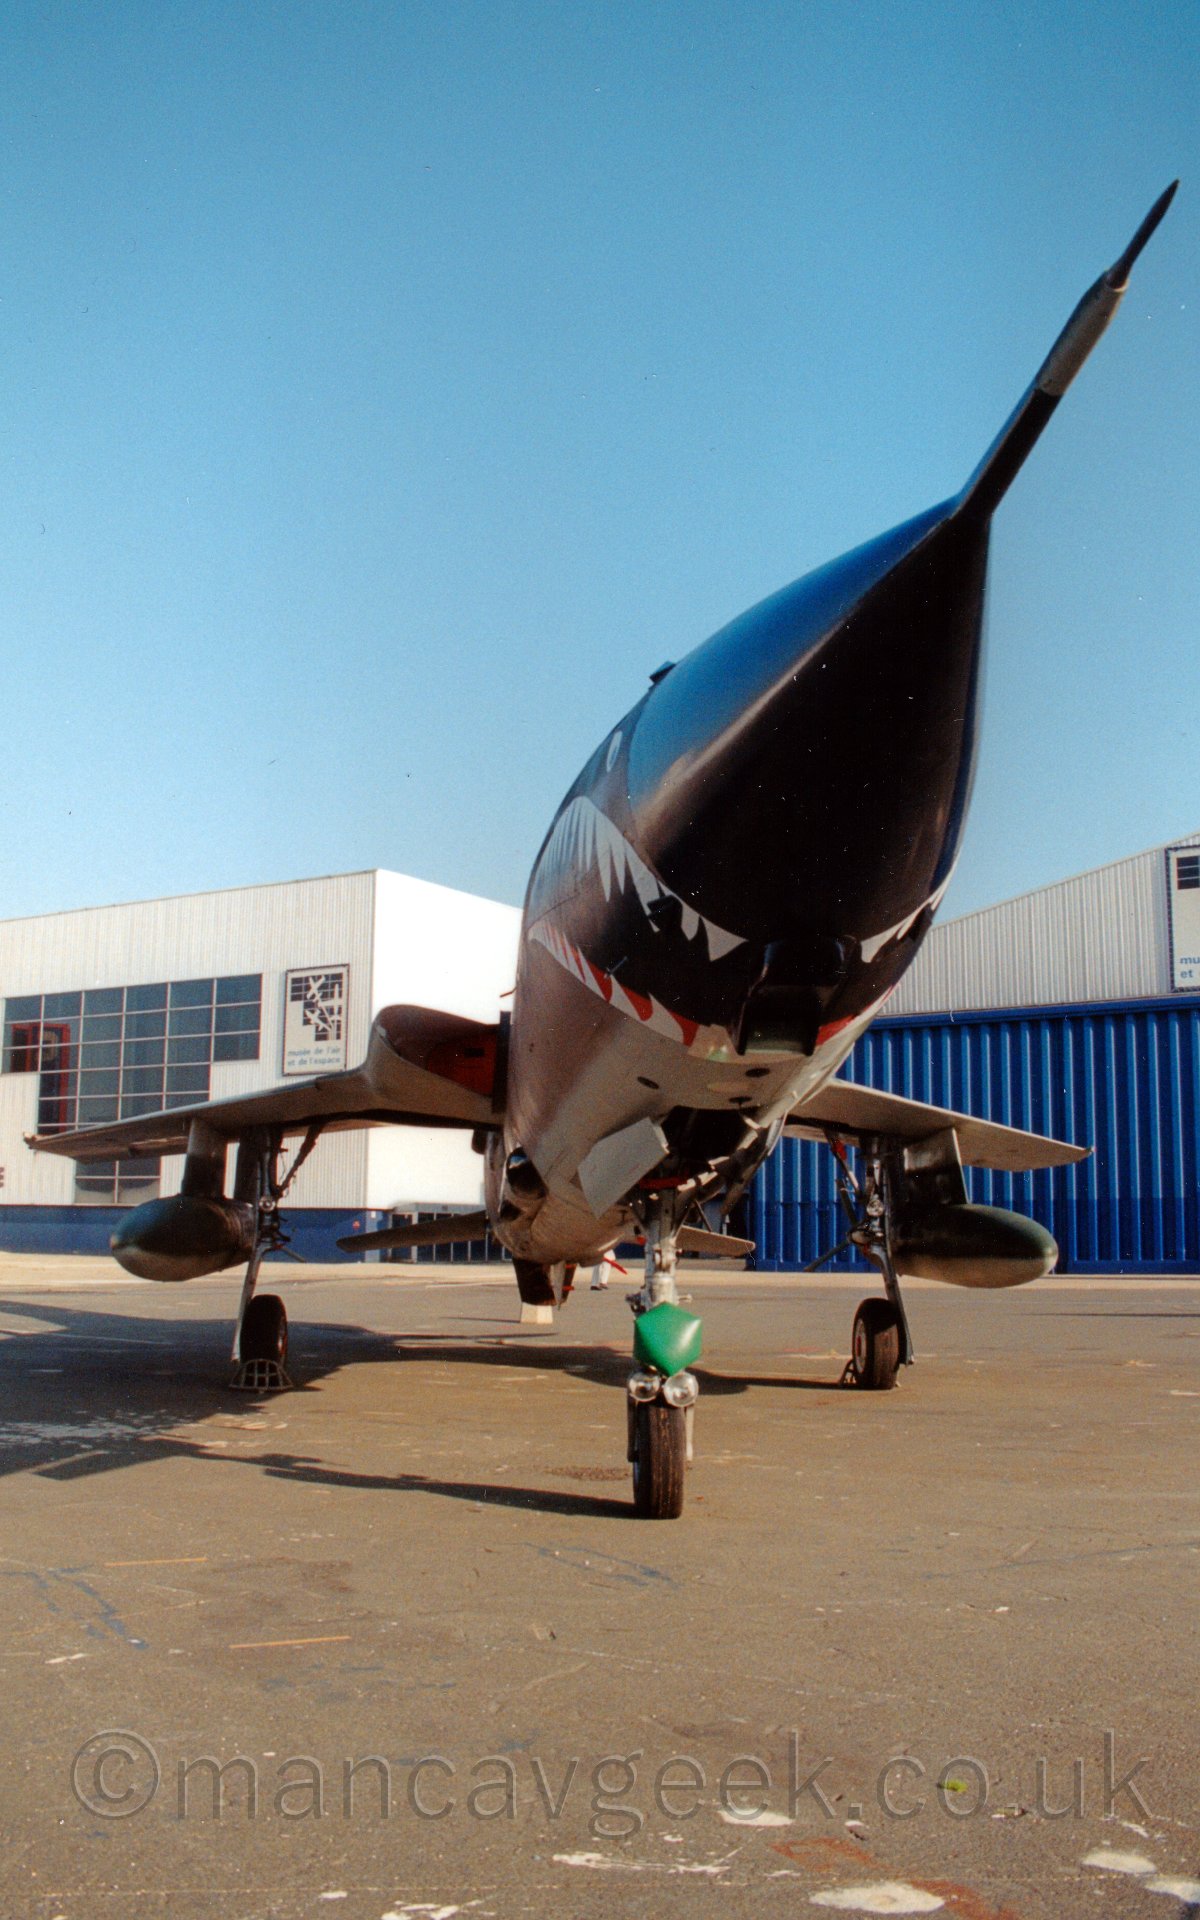 Front view from below and slightly to the left of a single-engined, single-seat jet fighter, parked facing slightly to the right of the camera. The plane is mostly painted a muddy brown, with a light grey belly, and a sharks mouth painted on the lower forward fuselage, behind the black nosecone, which itself has a large probe poking forward, towards the top right corner of the frame. There are large drop tanks suspended below the wings, and a large green light on the nosewheel door. In the background, a large white building stretches across the frame, the bit on the right having large blue hangar doors. Above, the sky is a gorgeous blue.